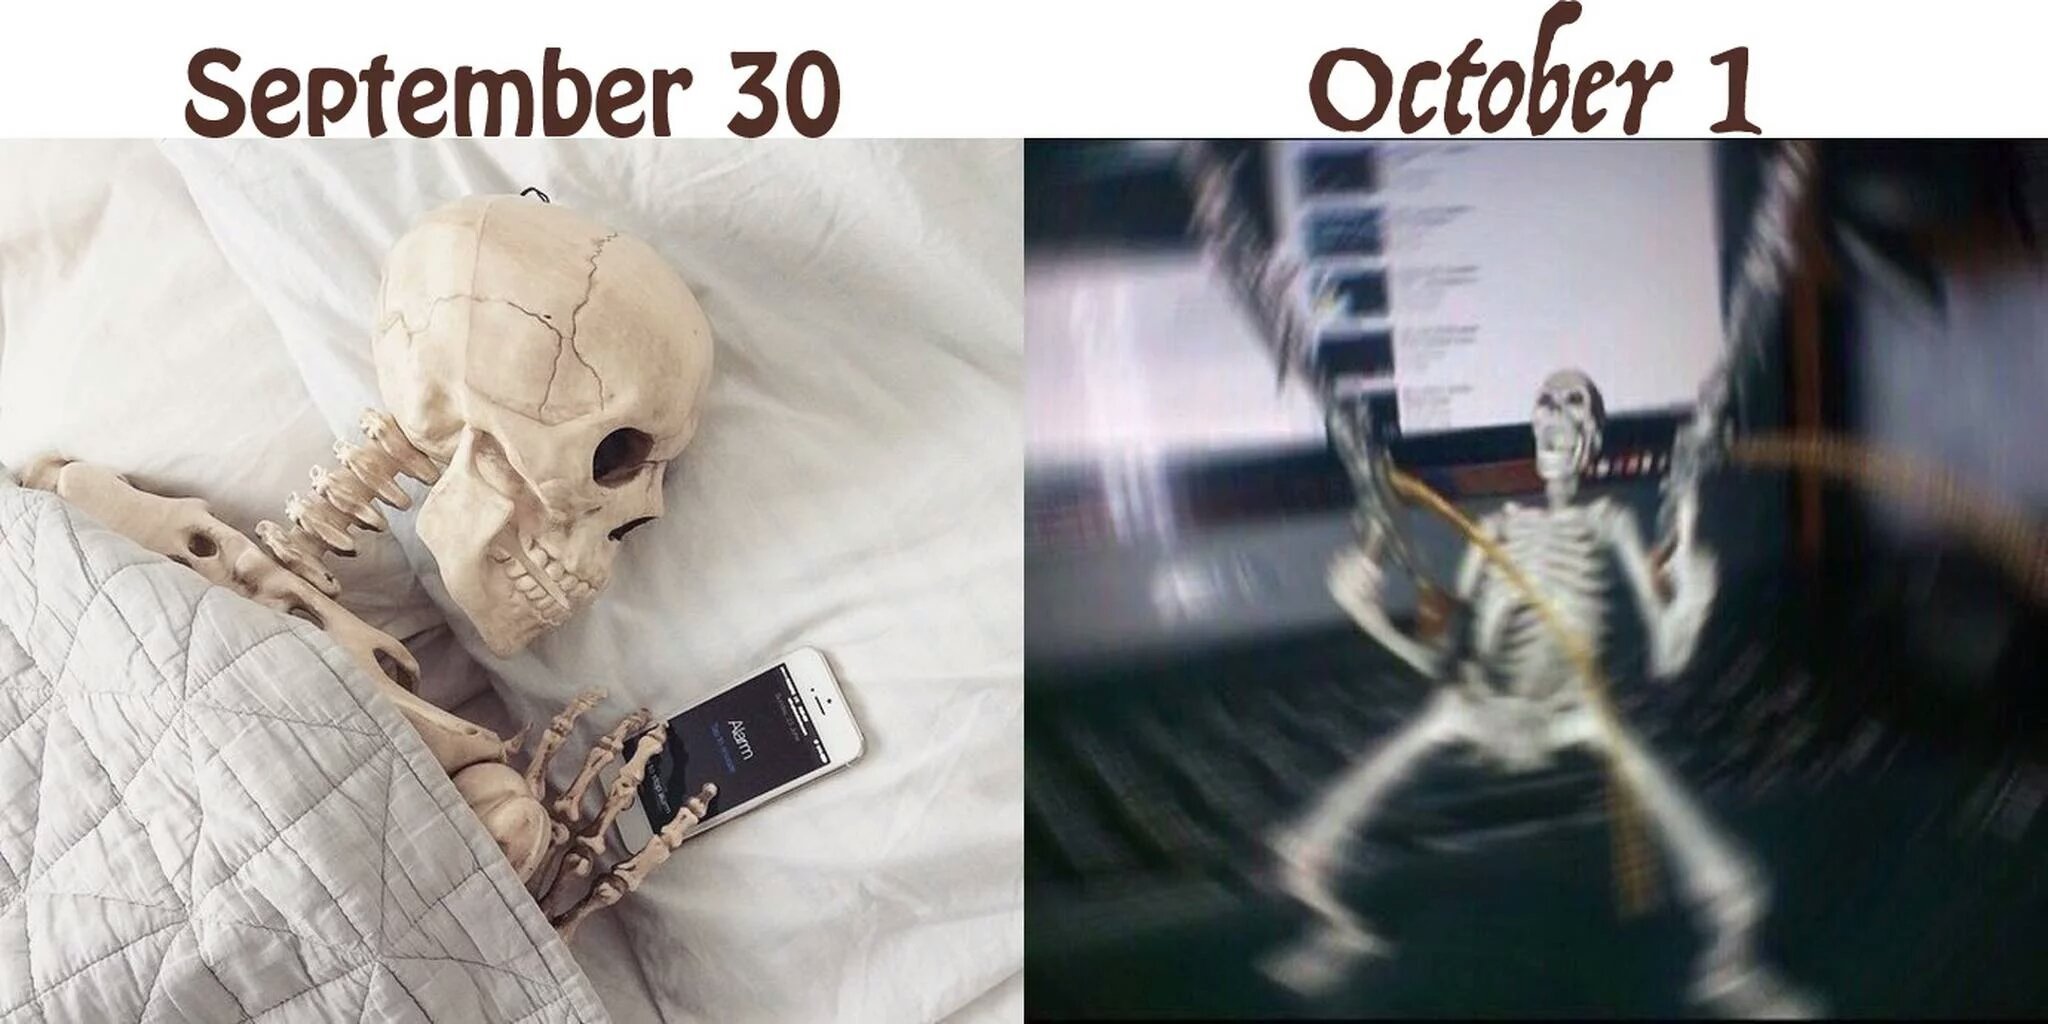 It's nearly spooky time boys! Bring your best spooky army! - meme